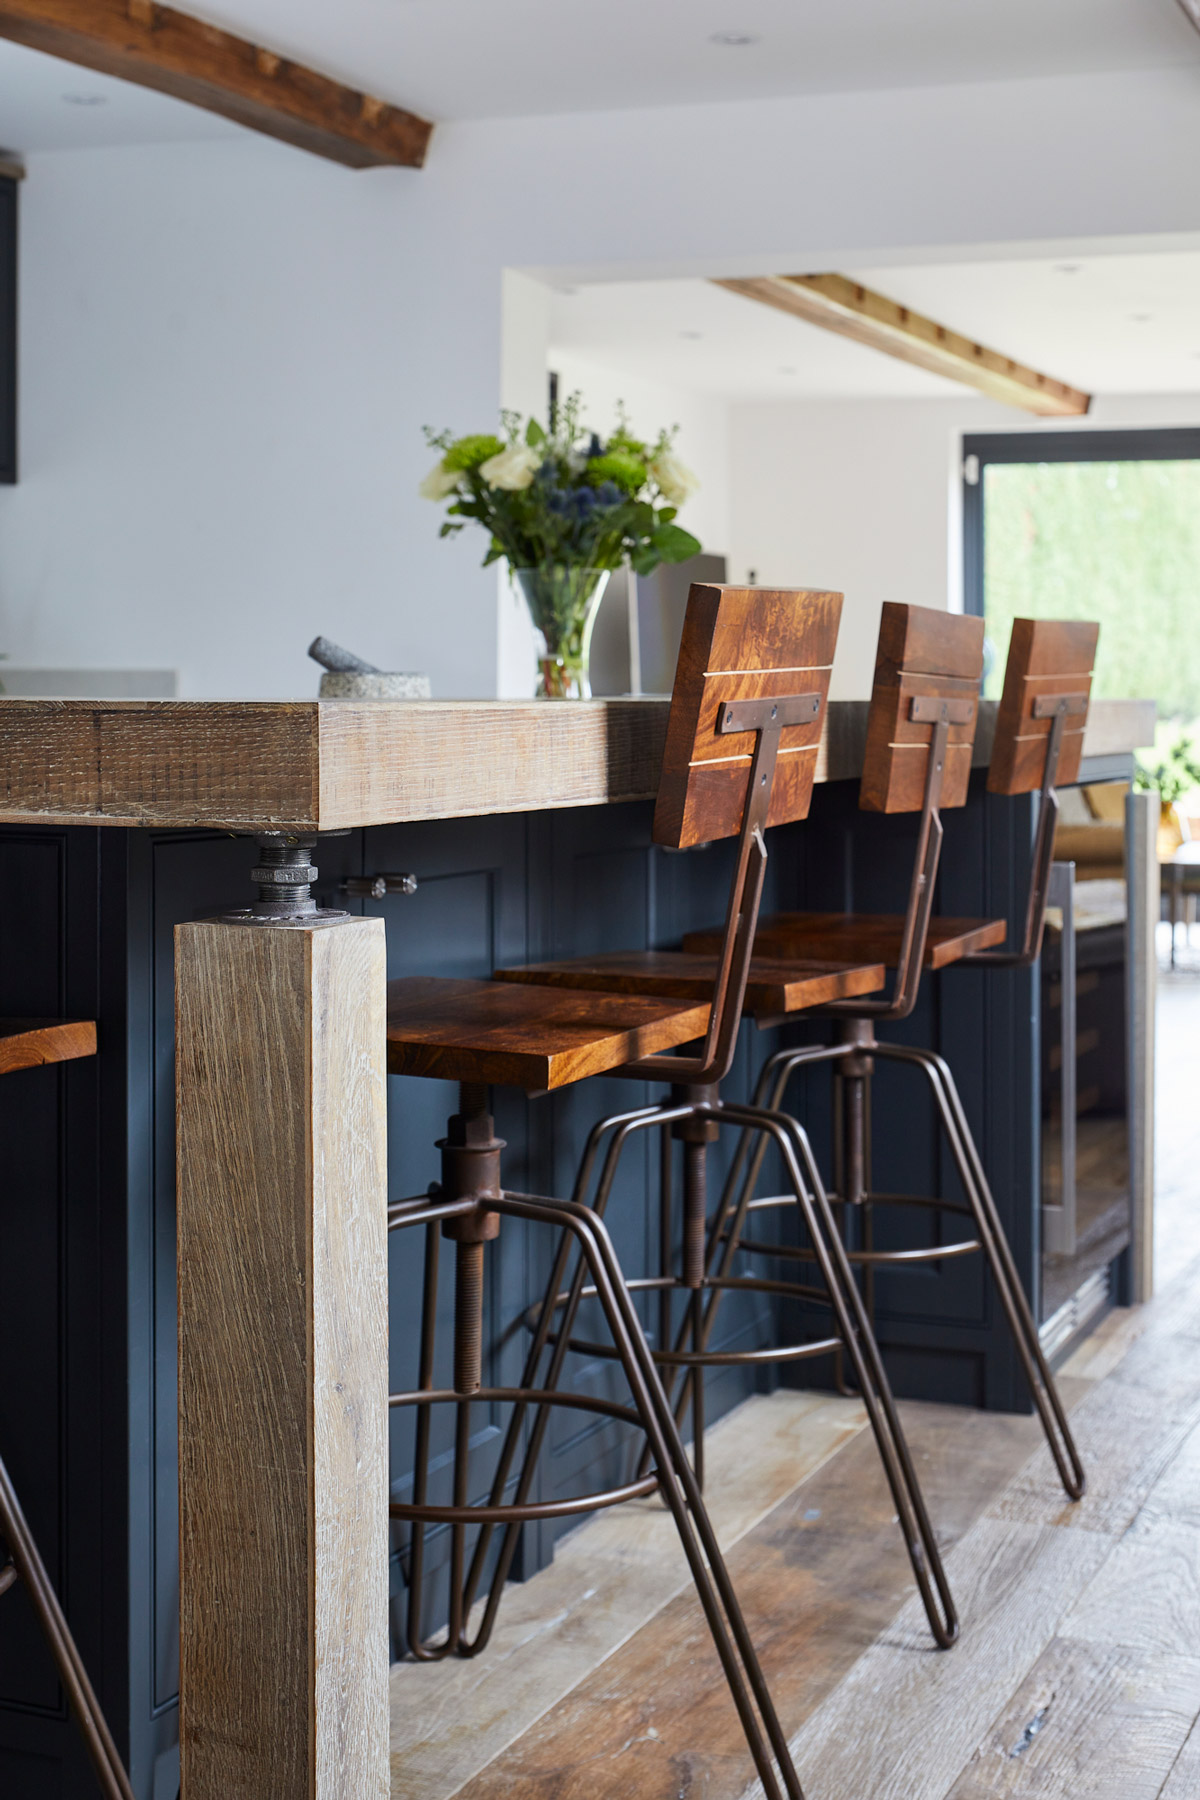 Industrial bar stool with wooden seat and backrest